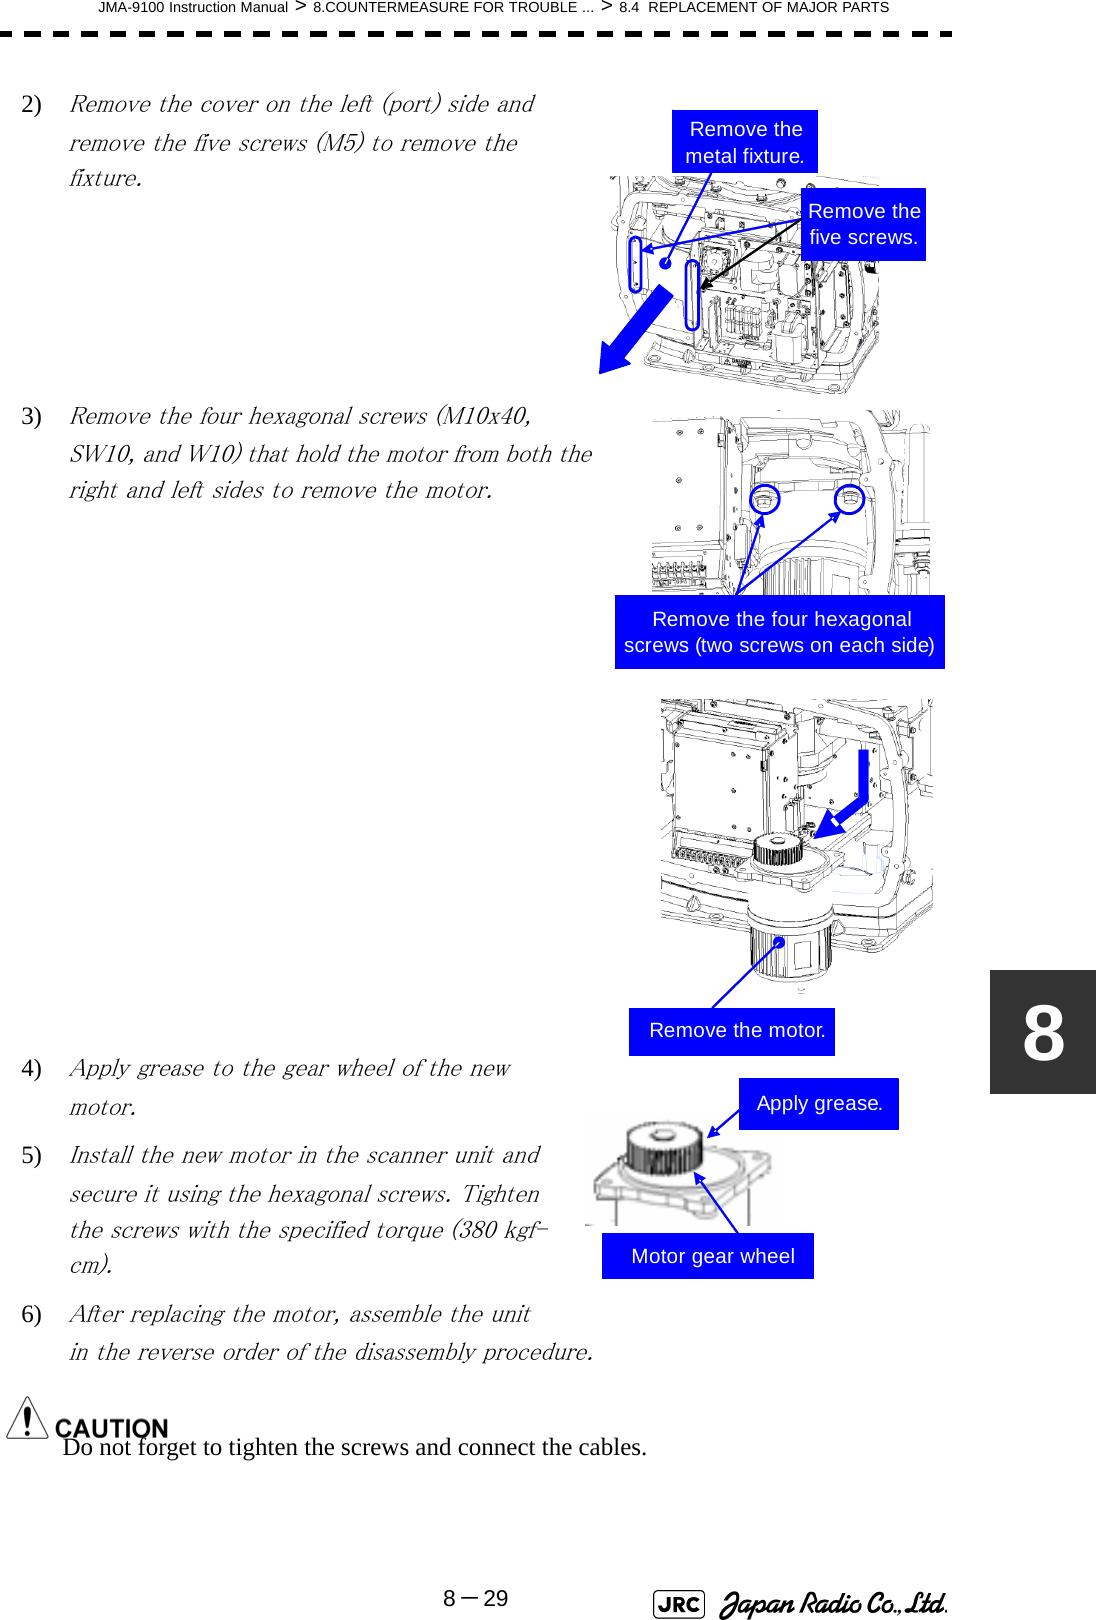 JMA-9100 Instruction Manual &gt; 8.COUNTERMEASURE FOR TROUBLE ... &gt; 8.4  REPLACEMENT OF MAJOR PARTS8－2982) Remove the cover on the left (port) side and remove the five screws (M5) to remove the fixture.3) Remove the four hexagonal screws (M10x40, SW10, and W10) that hold the motor from both the right and left sides to remove the motor.4) Apply grease to the gear wheel of the new motor.5) Install the new motor in the scanner unit and secure it using the hexagonal screws. Tighten the screws with the specified torque (380 kgf-cm).6) After replacing the motor, assemble the unit in the reverse order of the disassembly procedure.Do not forget to tighten the screws and connect the cables.Remove the metal fixture.Remove the five screws.Remove the four hexagonal screws (two screws on each side)Remove the motor.Apply grease.Motor gear wheel